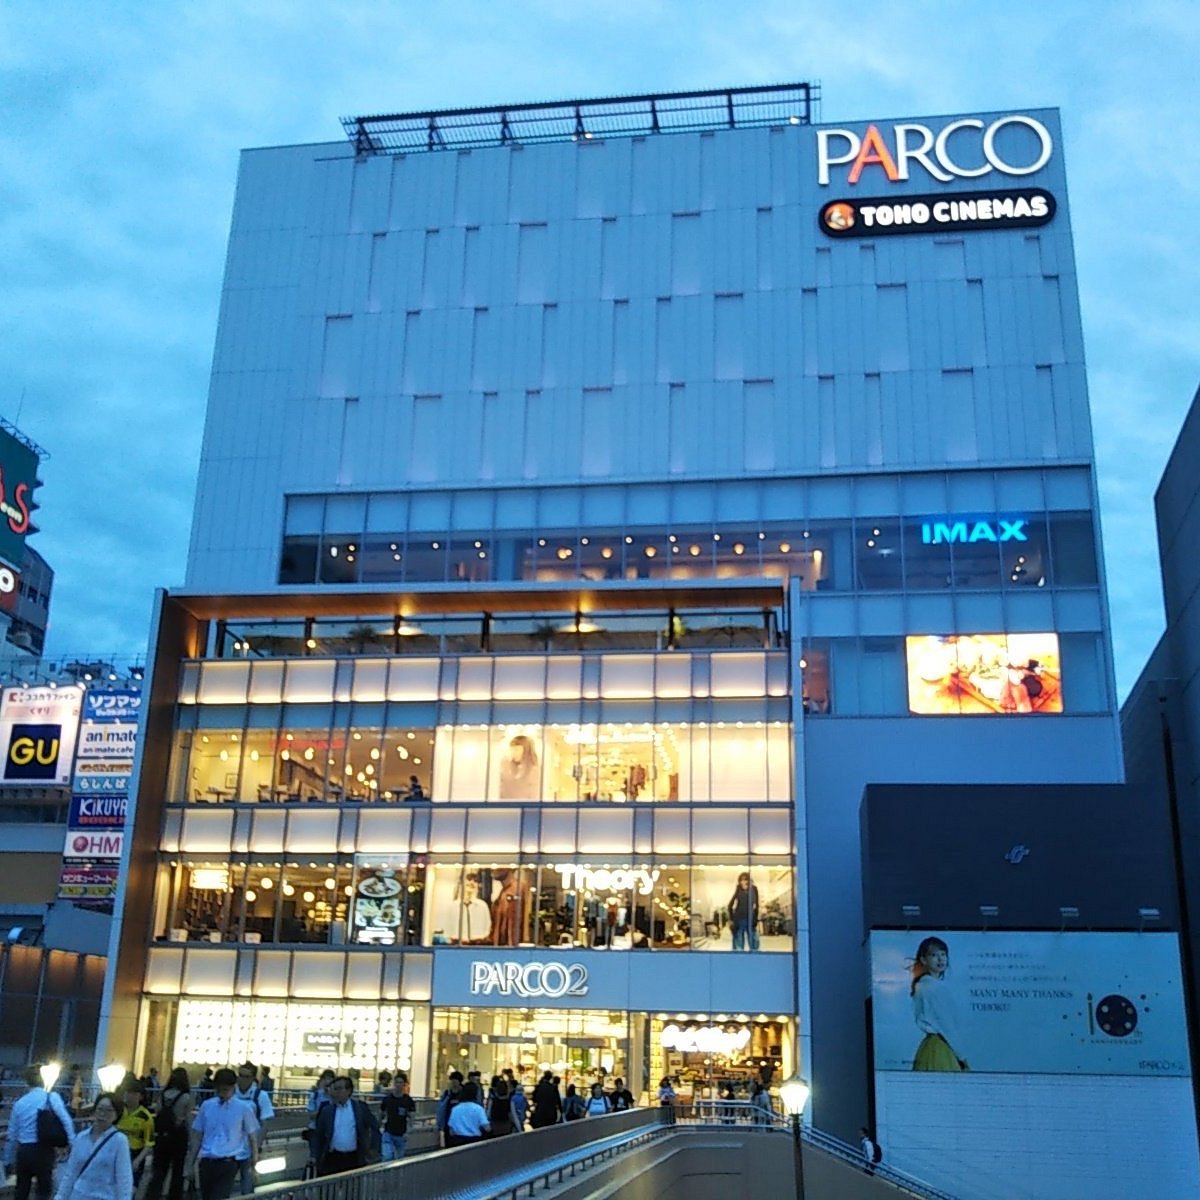 Sendai Parco 2 22 All You Need To Know Before You Go With Photos Tripadvisor